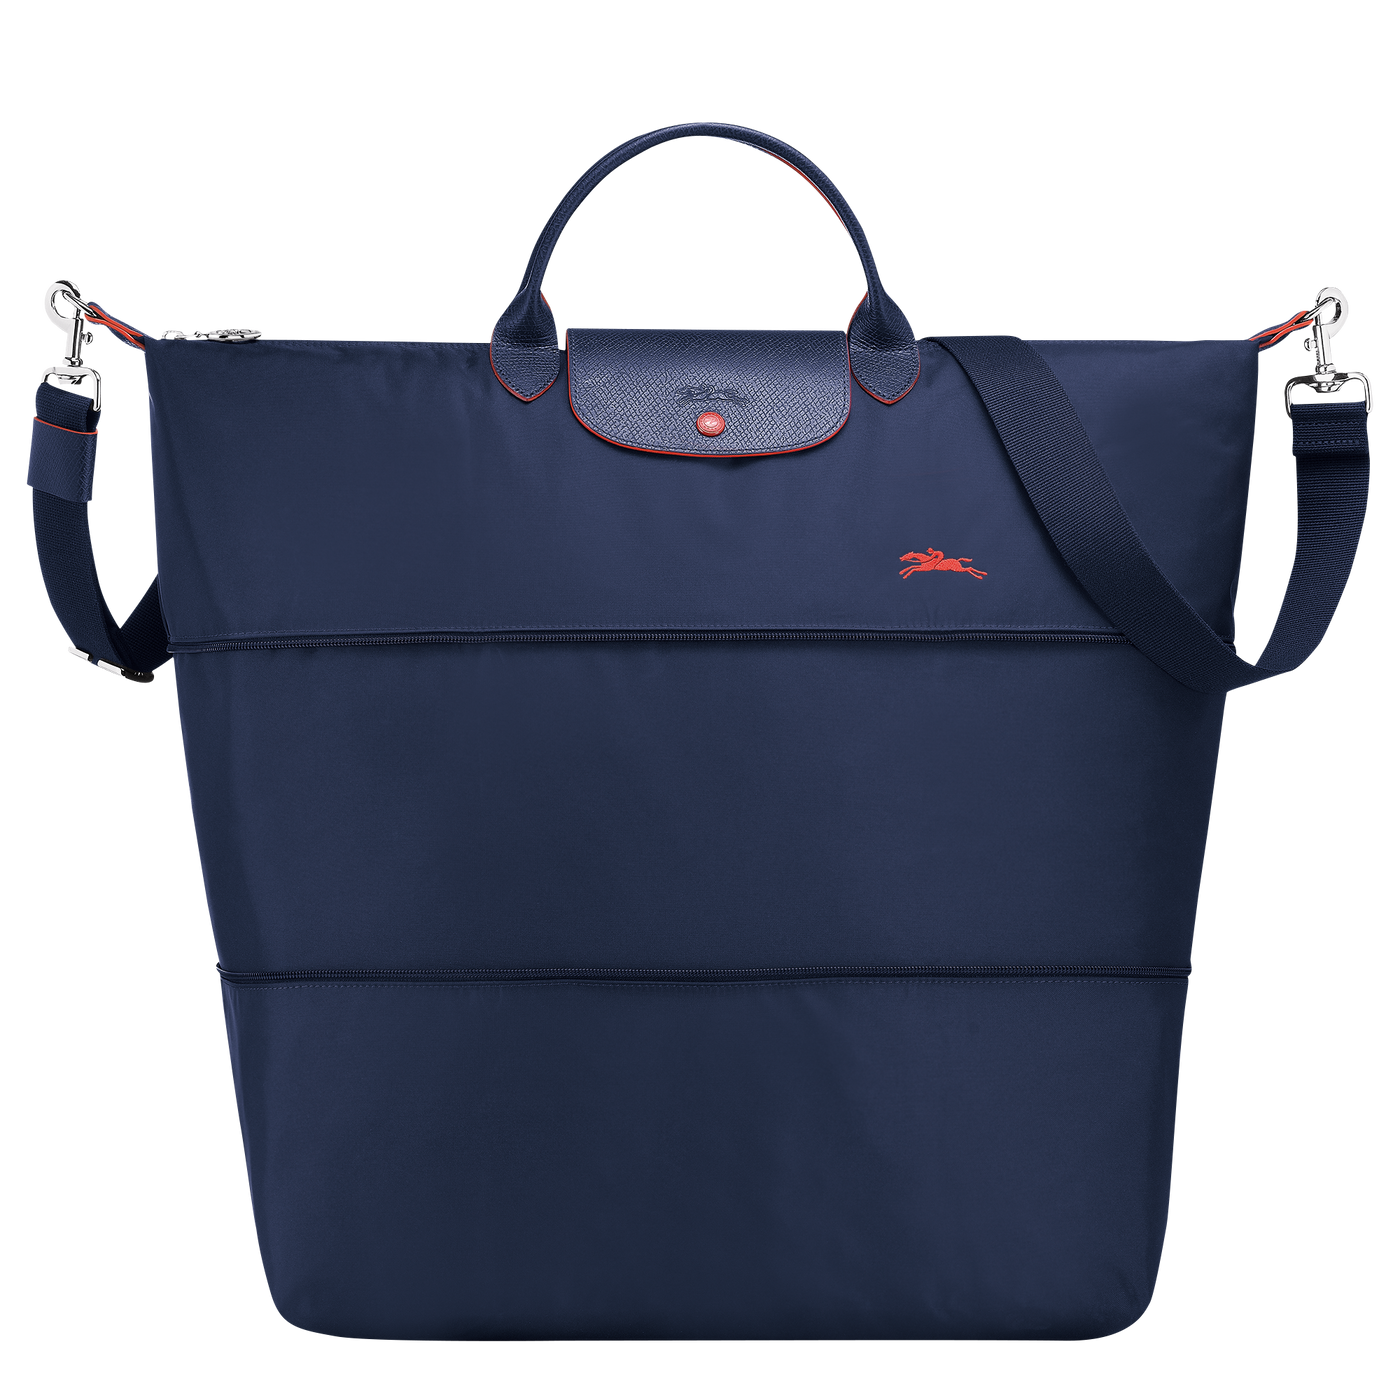 Shop The Latest Collection Of Longchamp Travel Bag Le Pliage Club -1911619 In Lebanon